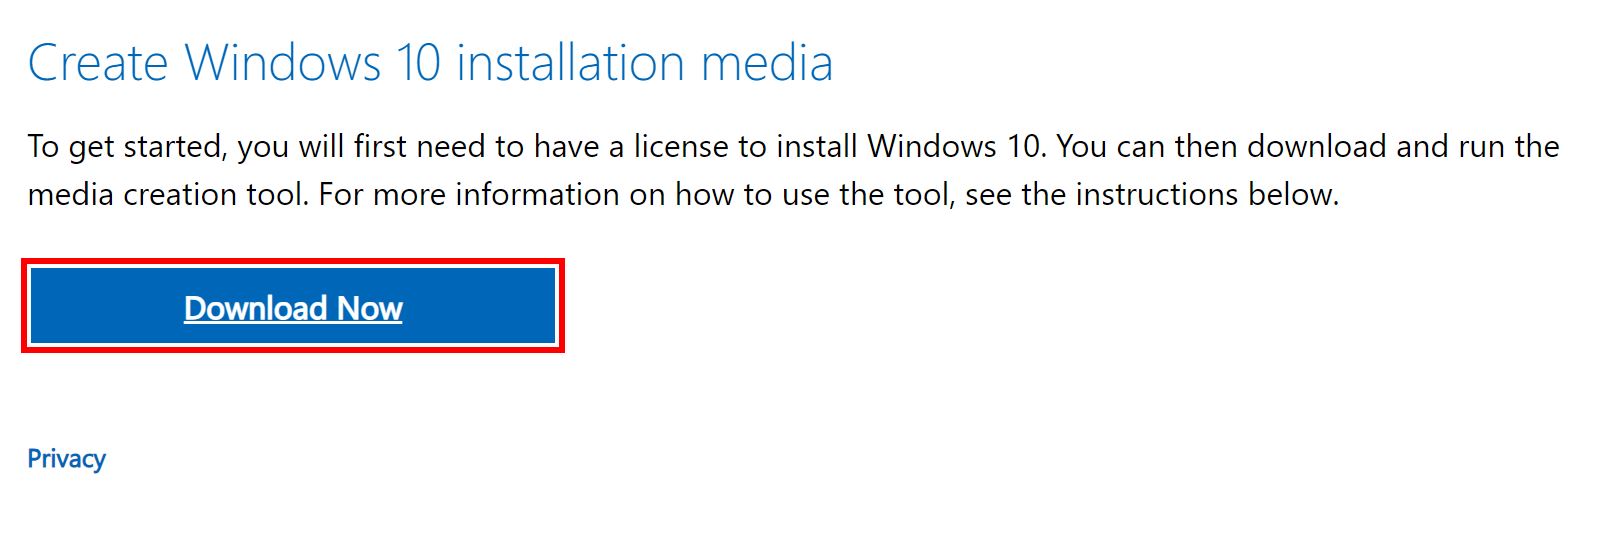 downgrading to Windows 10 for the tpm error in valorant